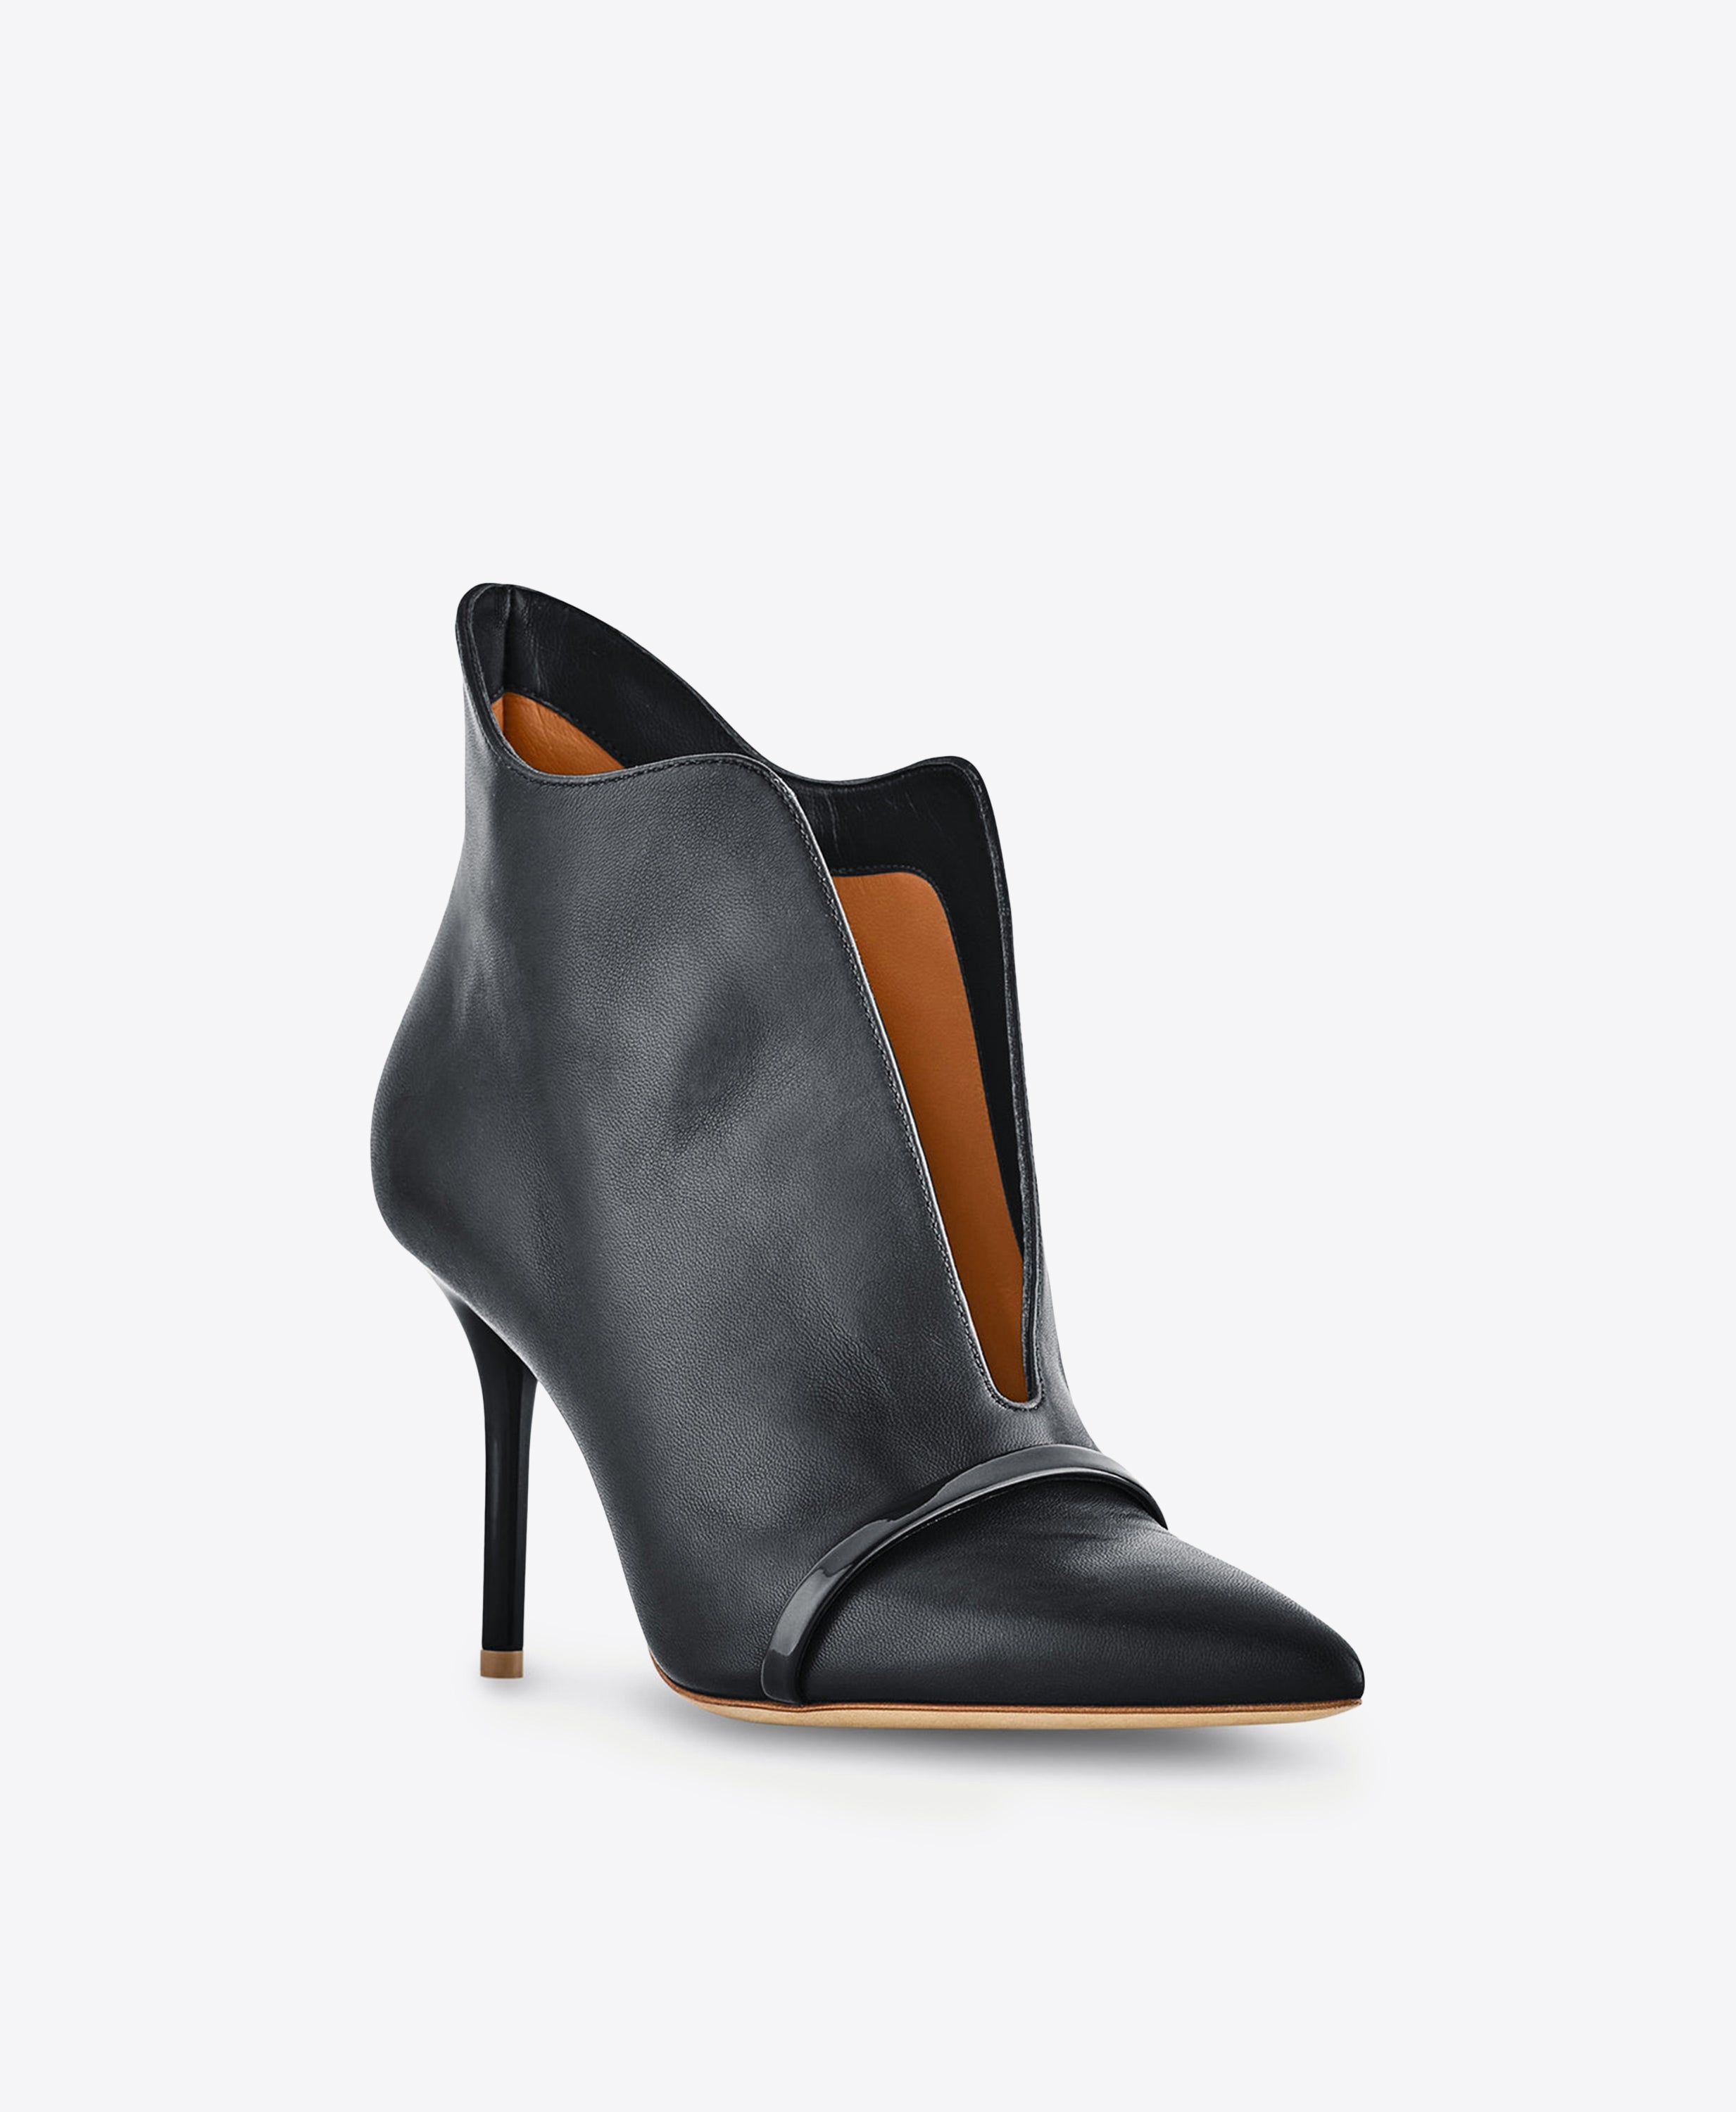 Cora 70mm Black Leather Pointed Boot | Malone Souliers